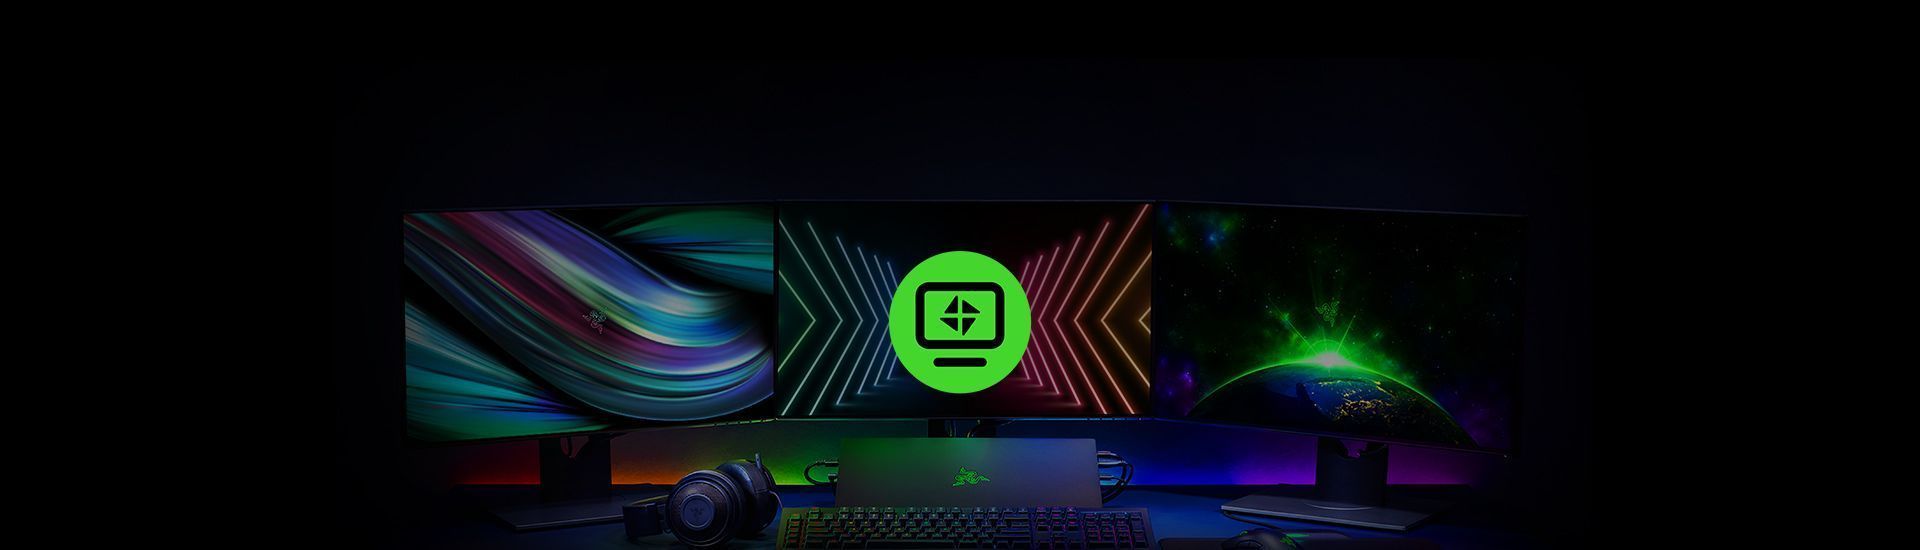 A Razer monitor with a green Chroma logo in the center - 3D, gaming, technology